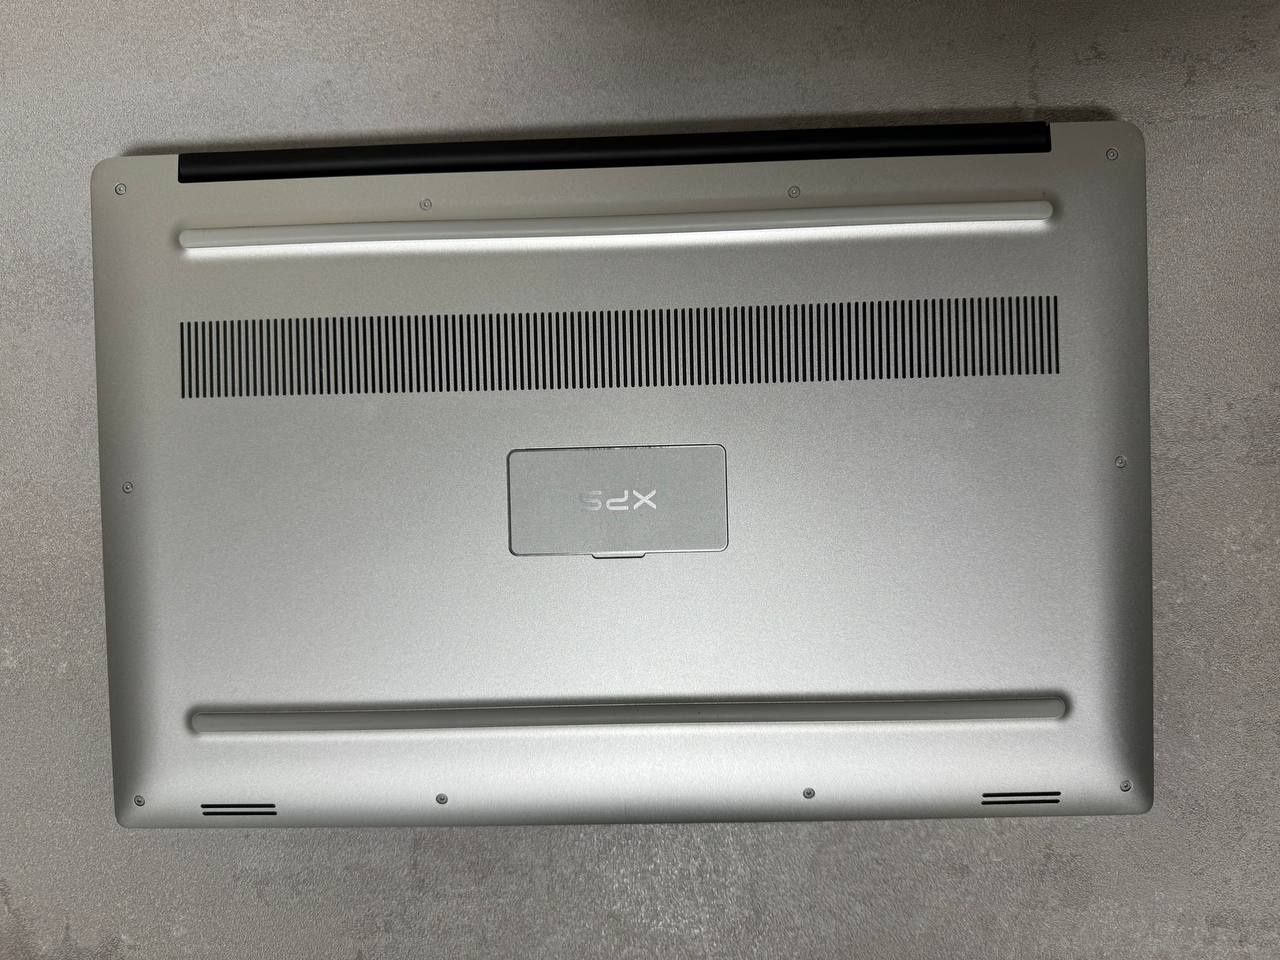 Dell XPS 9570 4k Touchscreen